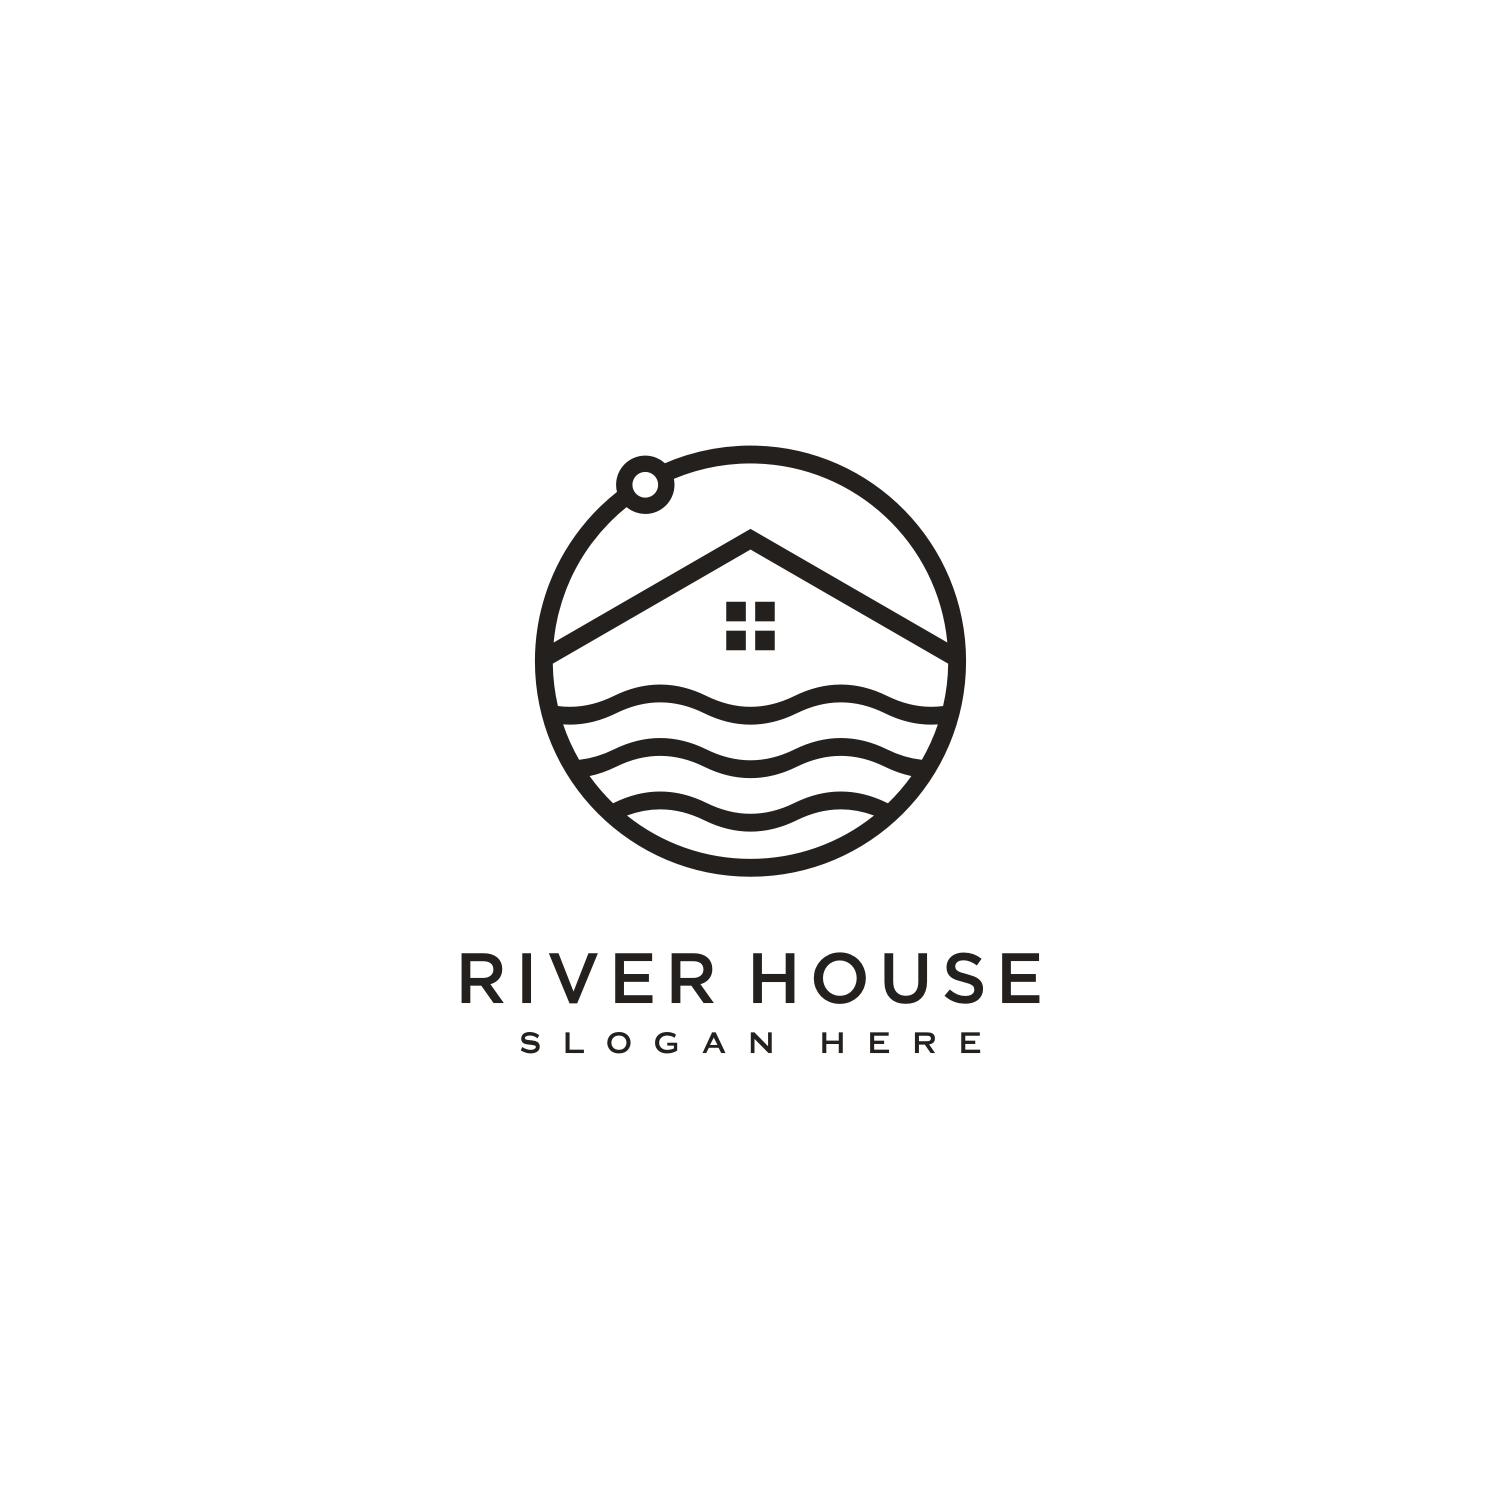 Set Of Minimalist Line Abstract House With River Logo Design Preview Image.